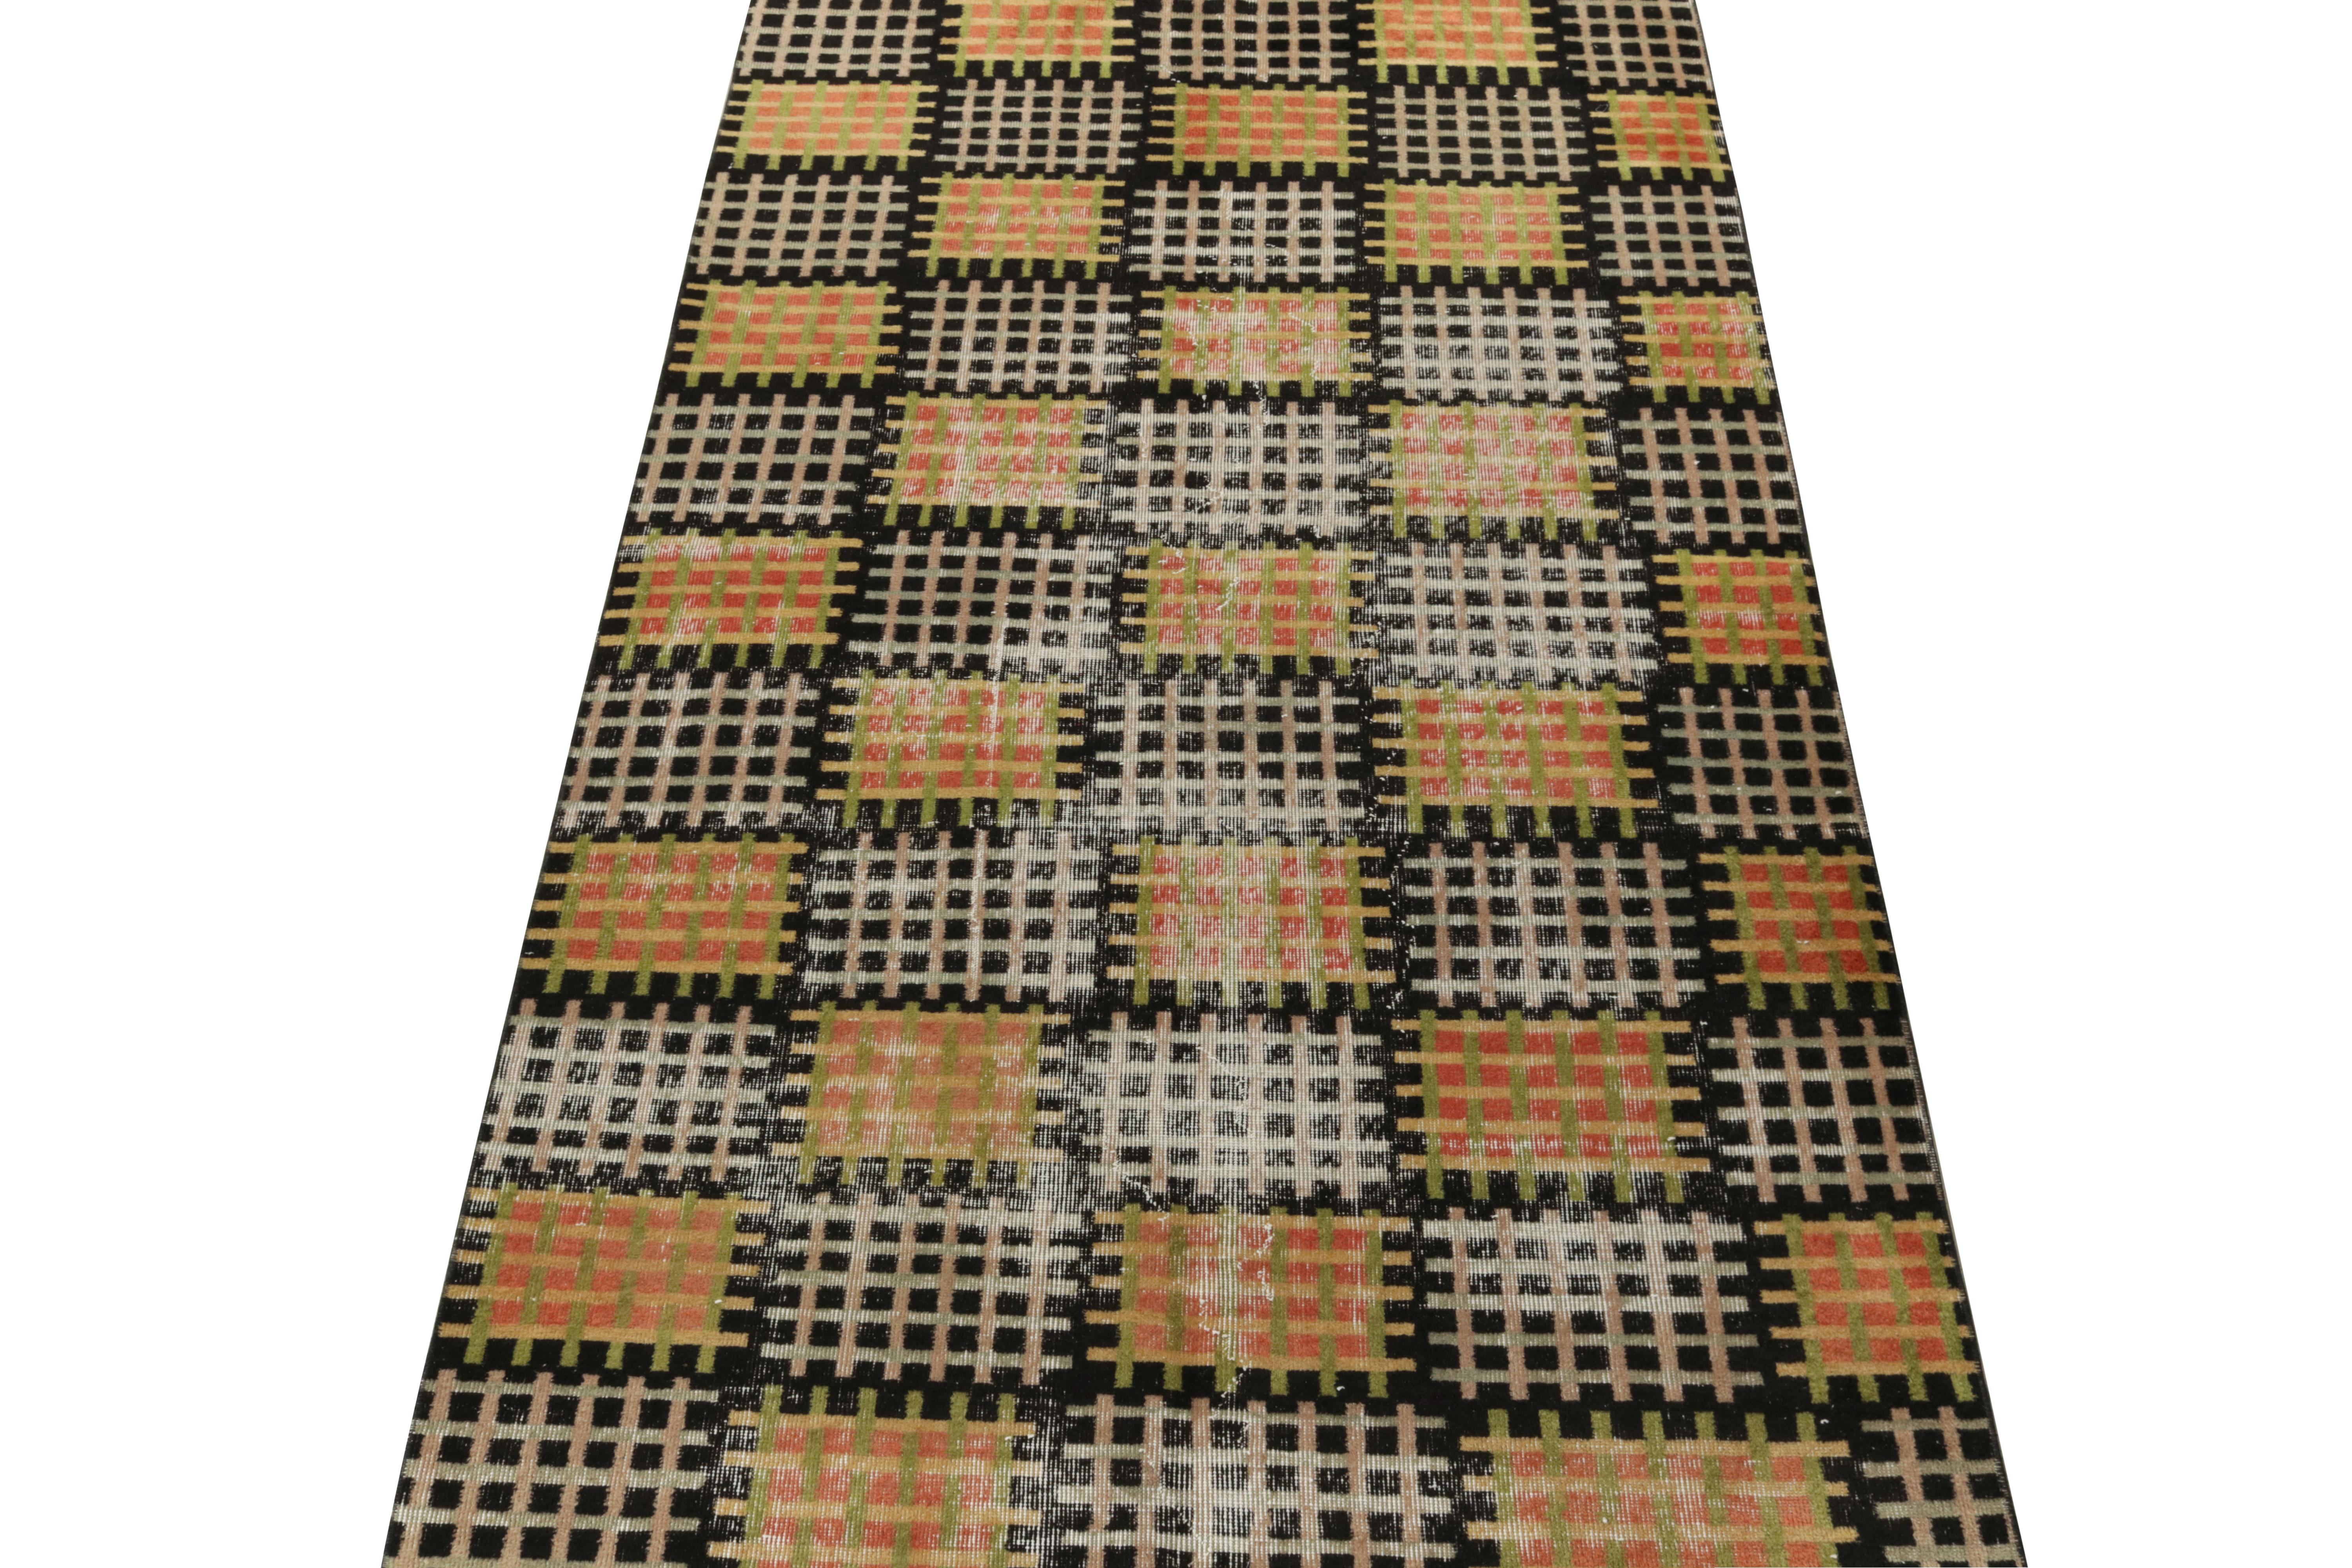 A handk-notted vintage Turkish piece coming from the 1960s, crafted by the celebrated Turkish designer Zeki Müren—the latest to join Rug & Kilim’s commemorative Mid-Century Pasha collection. The 5x9 distressed style rug enjoys a mesh pattern in